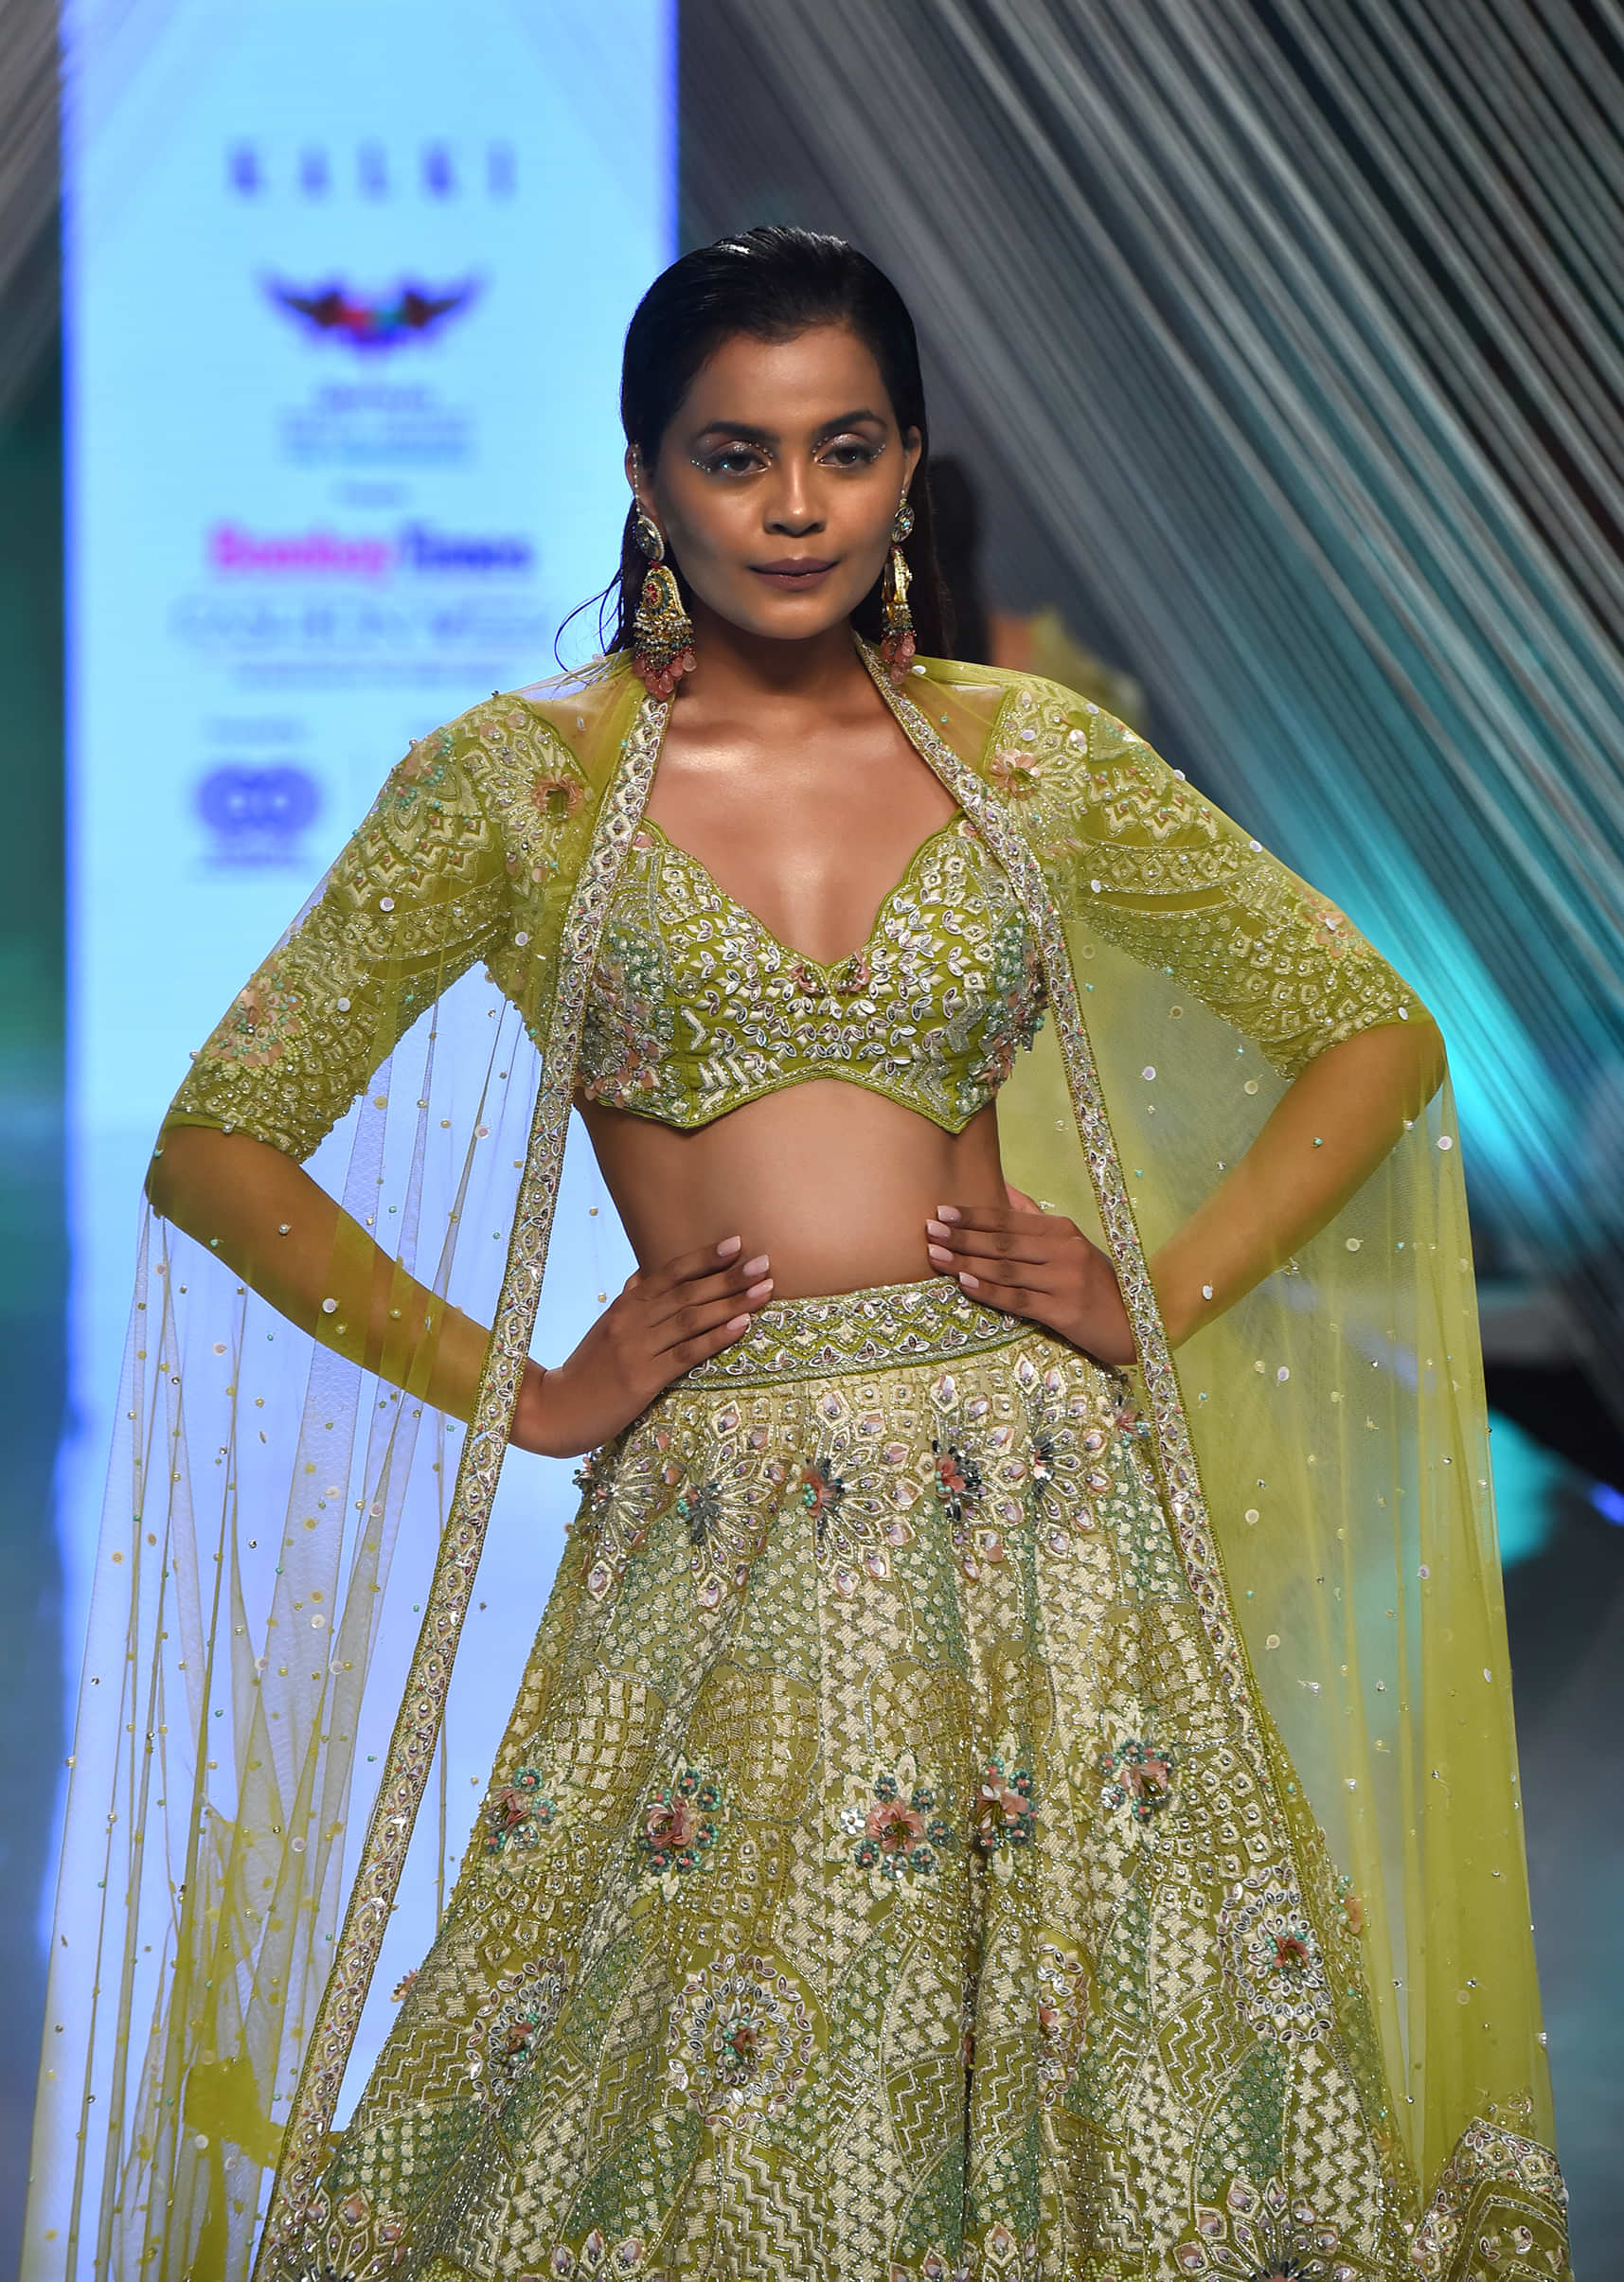 Citrus Green Organza Lehenga with a Crop Top With Resham Embroidery